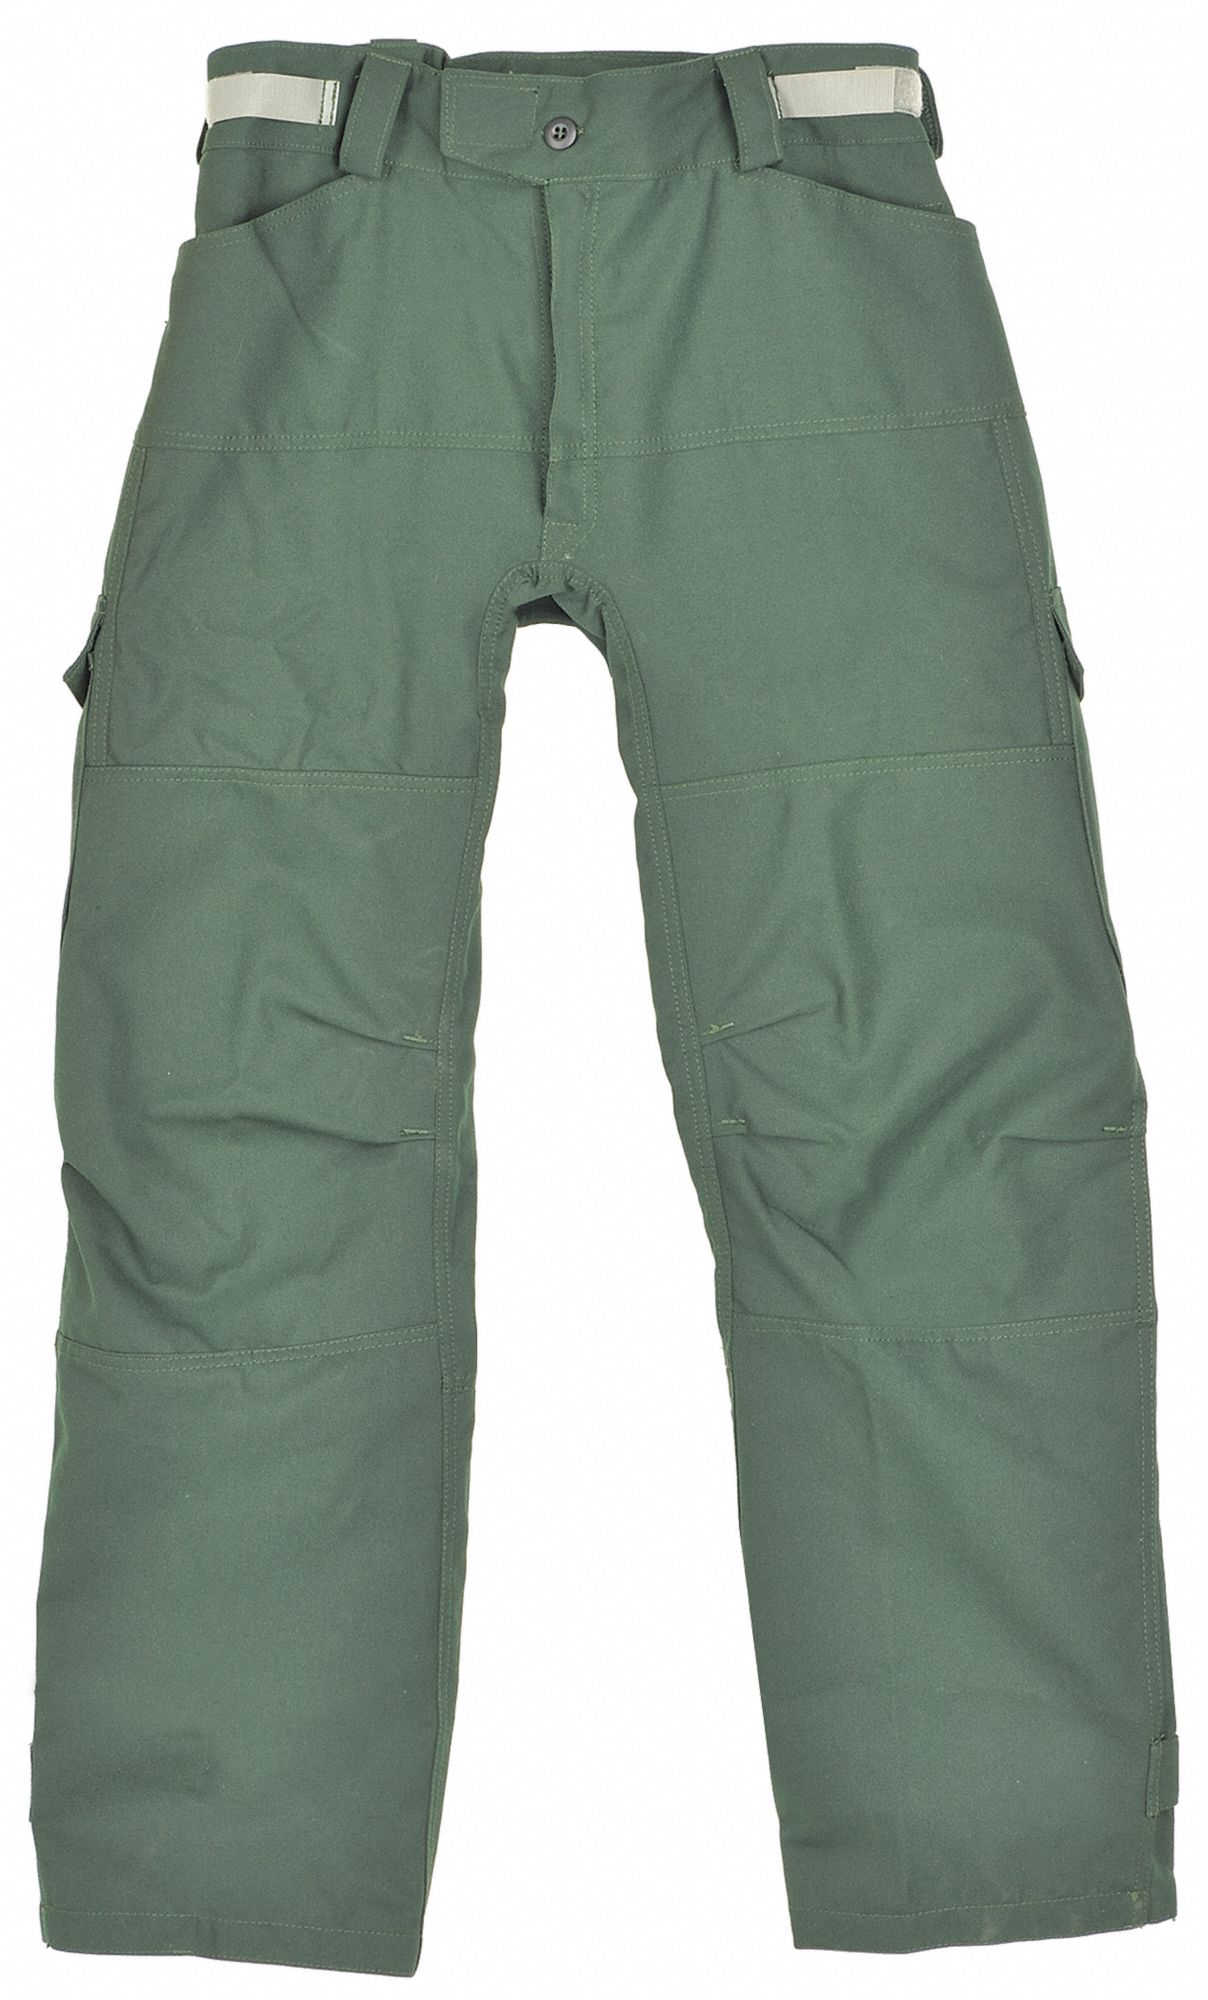 12R503 - Fire Pants Forest Green Inseam 28 In.